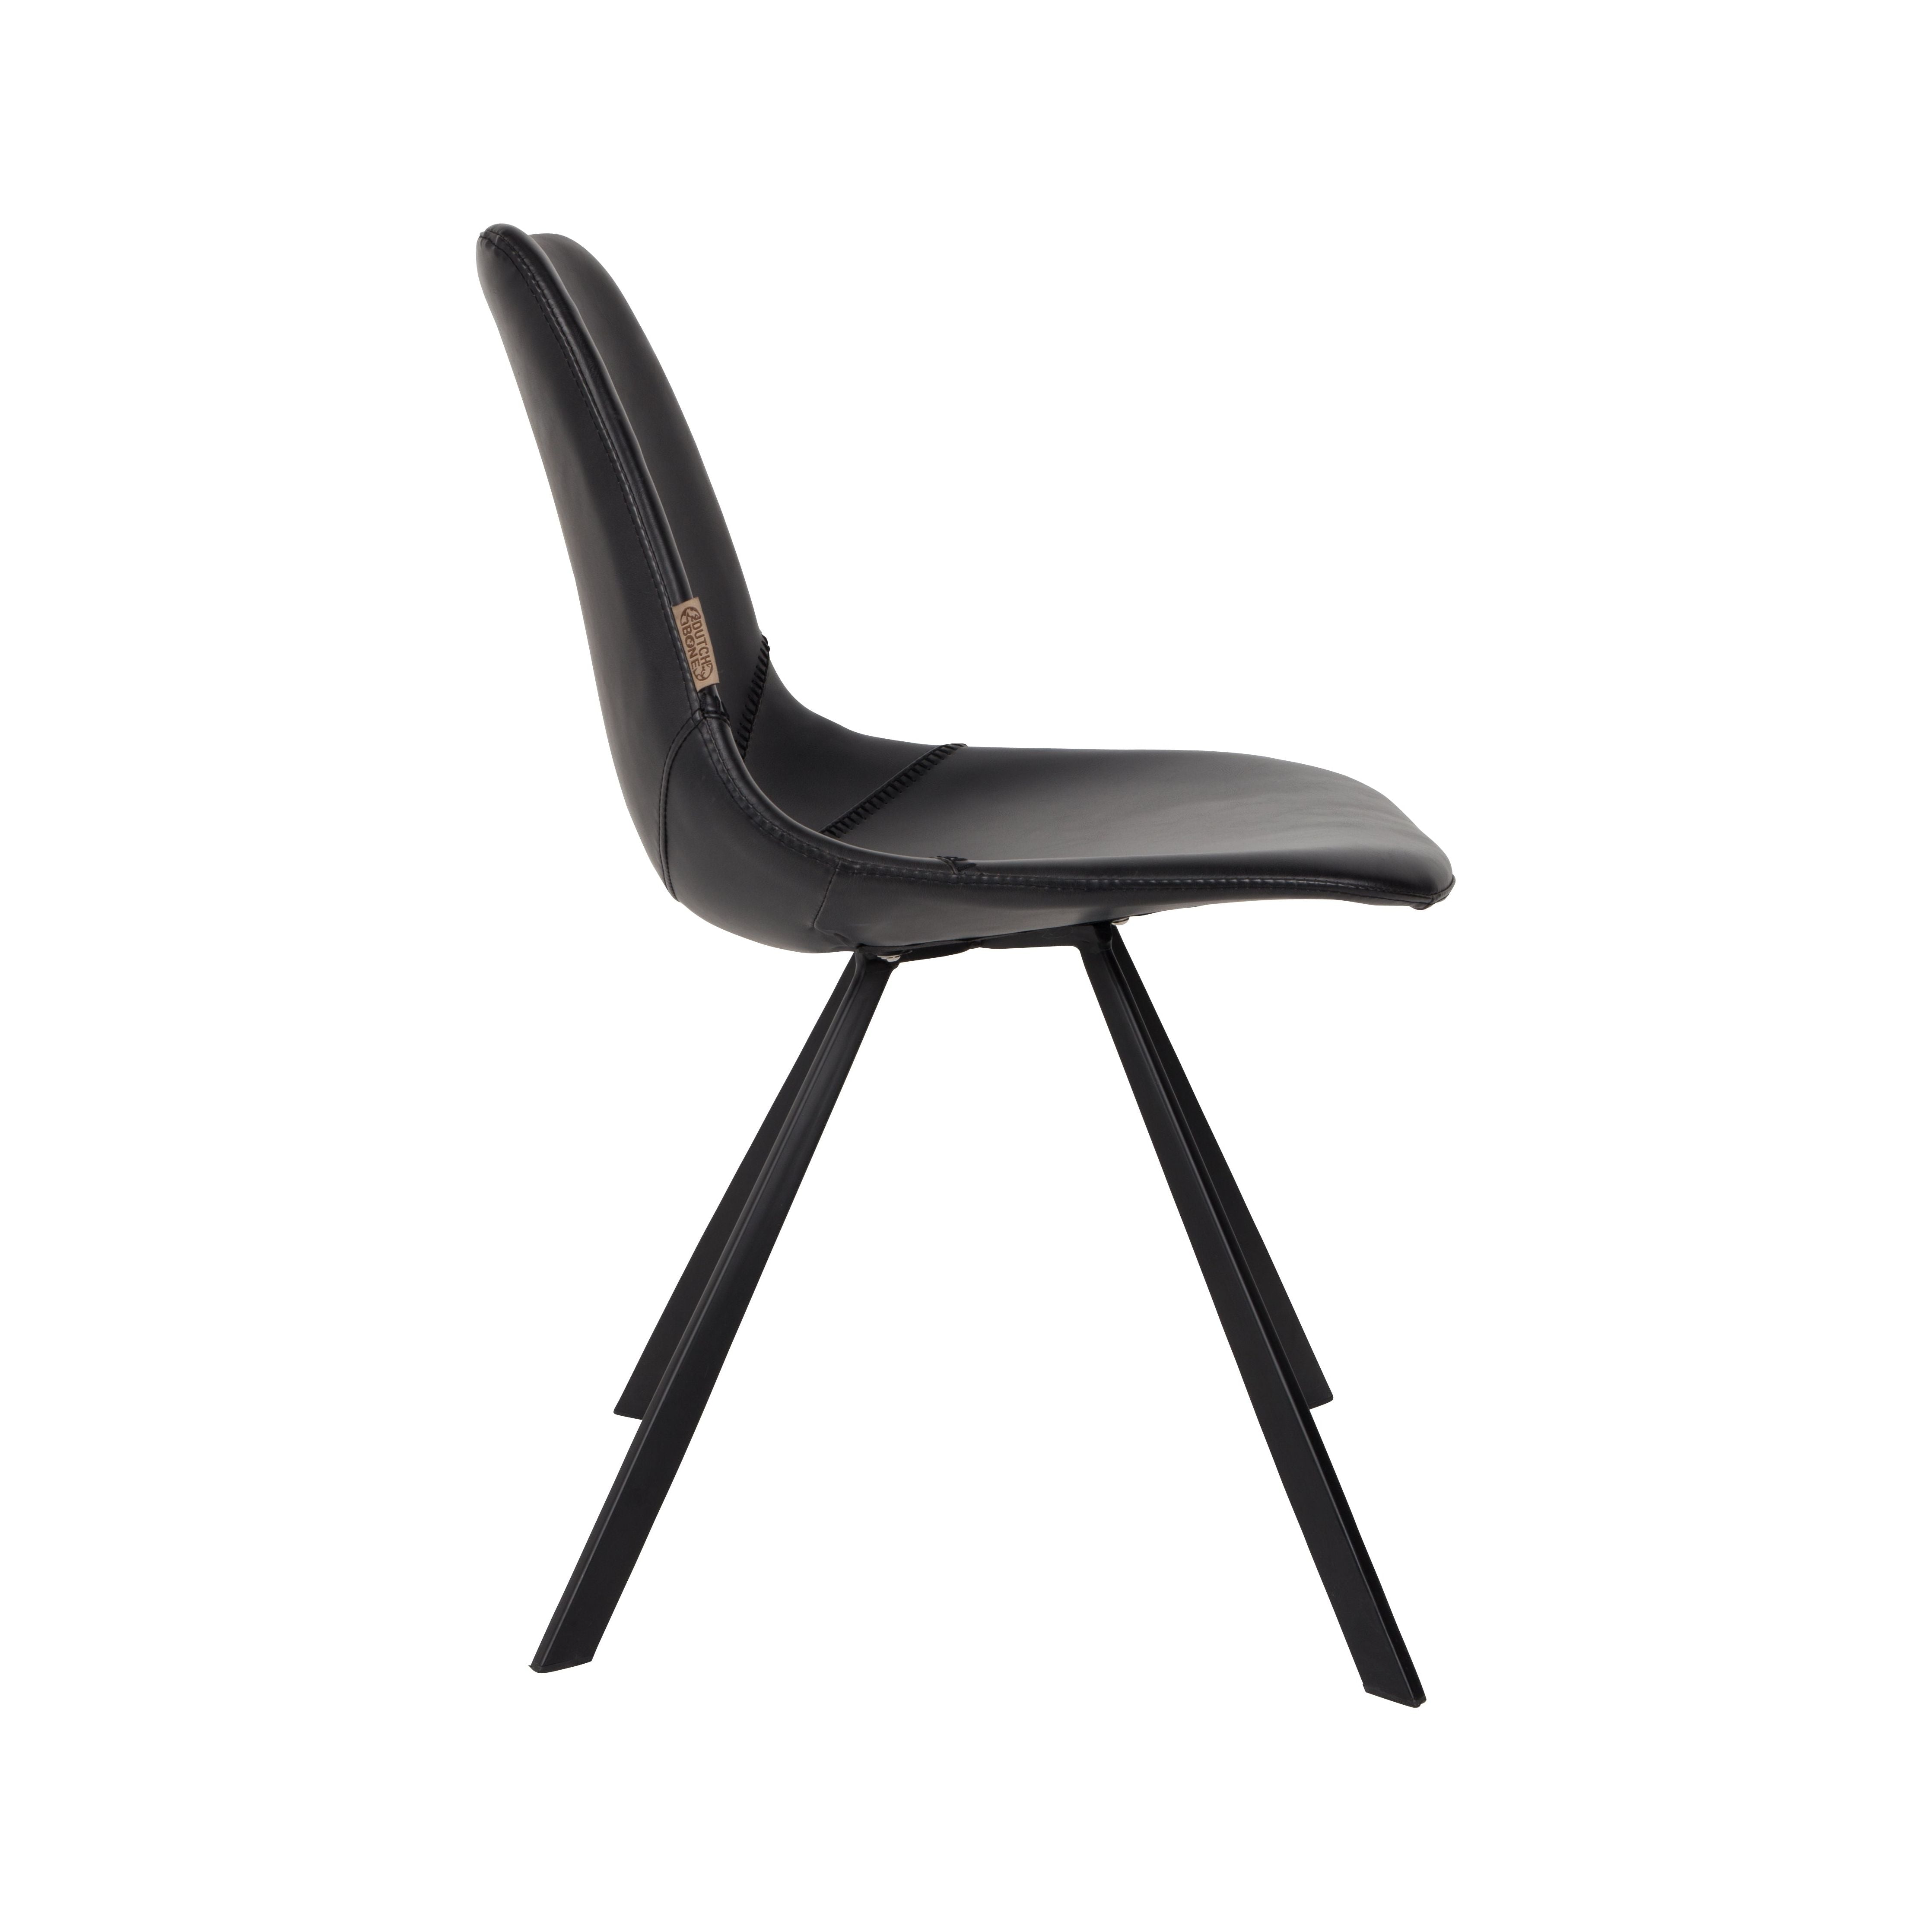 Chair franky black | 2 pieces